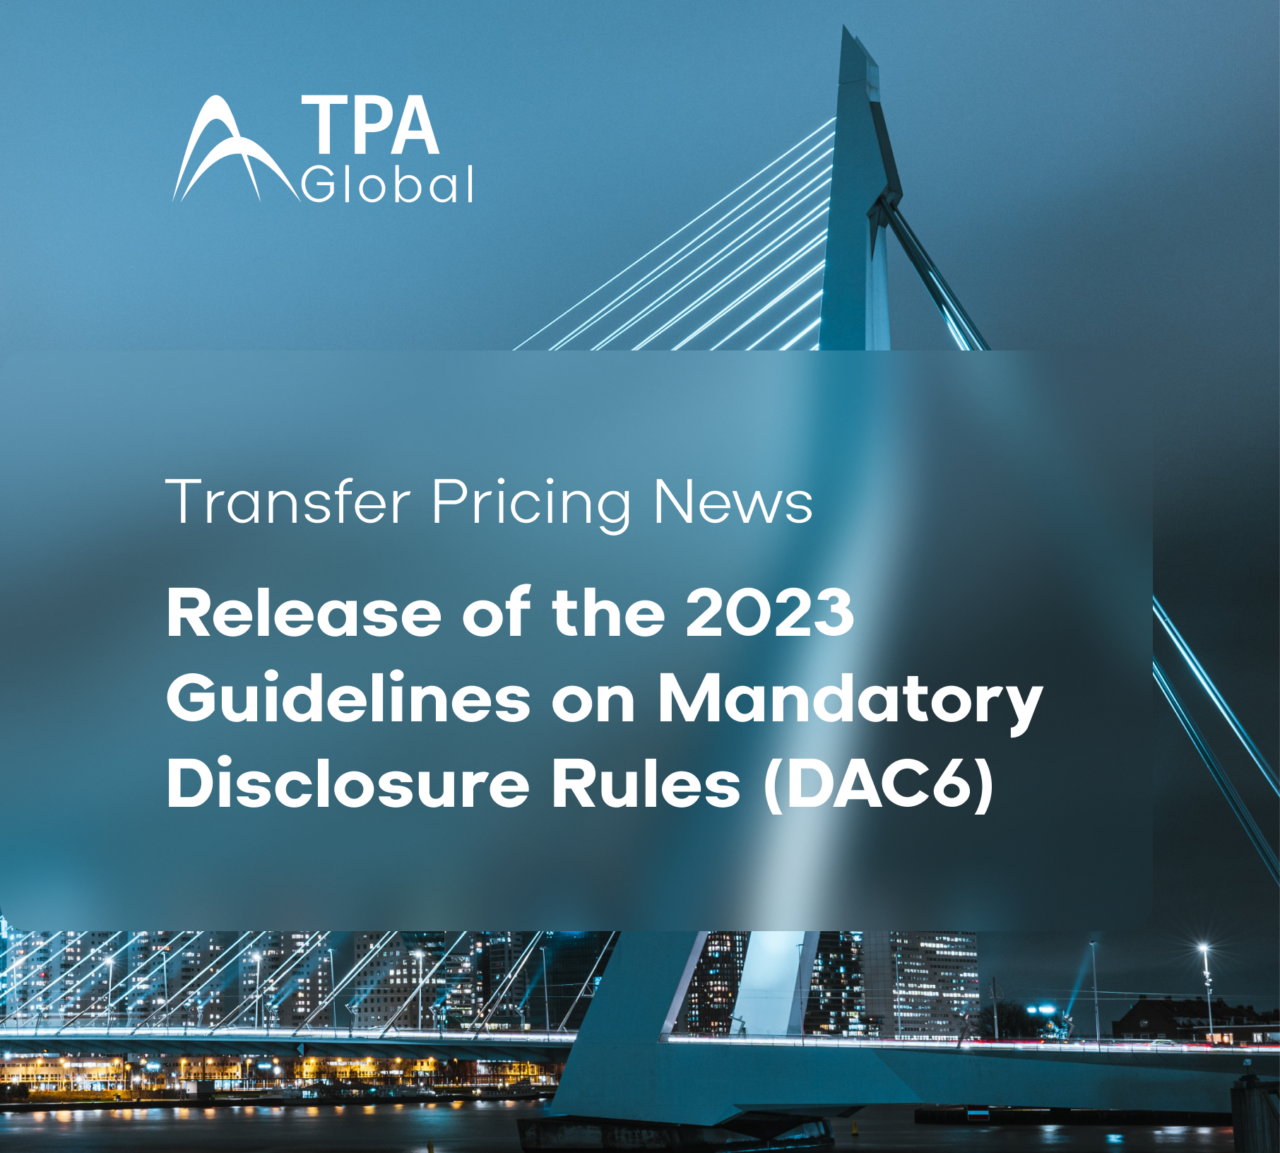 Release of the 2023 Guidelines on Mandatory Disclosure Rules (DAC6)